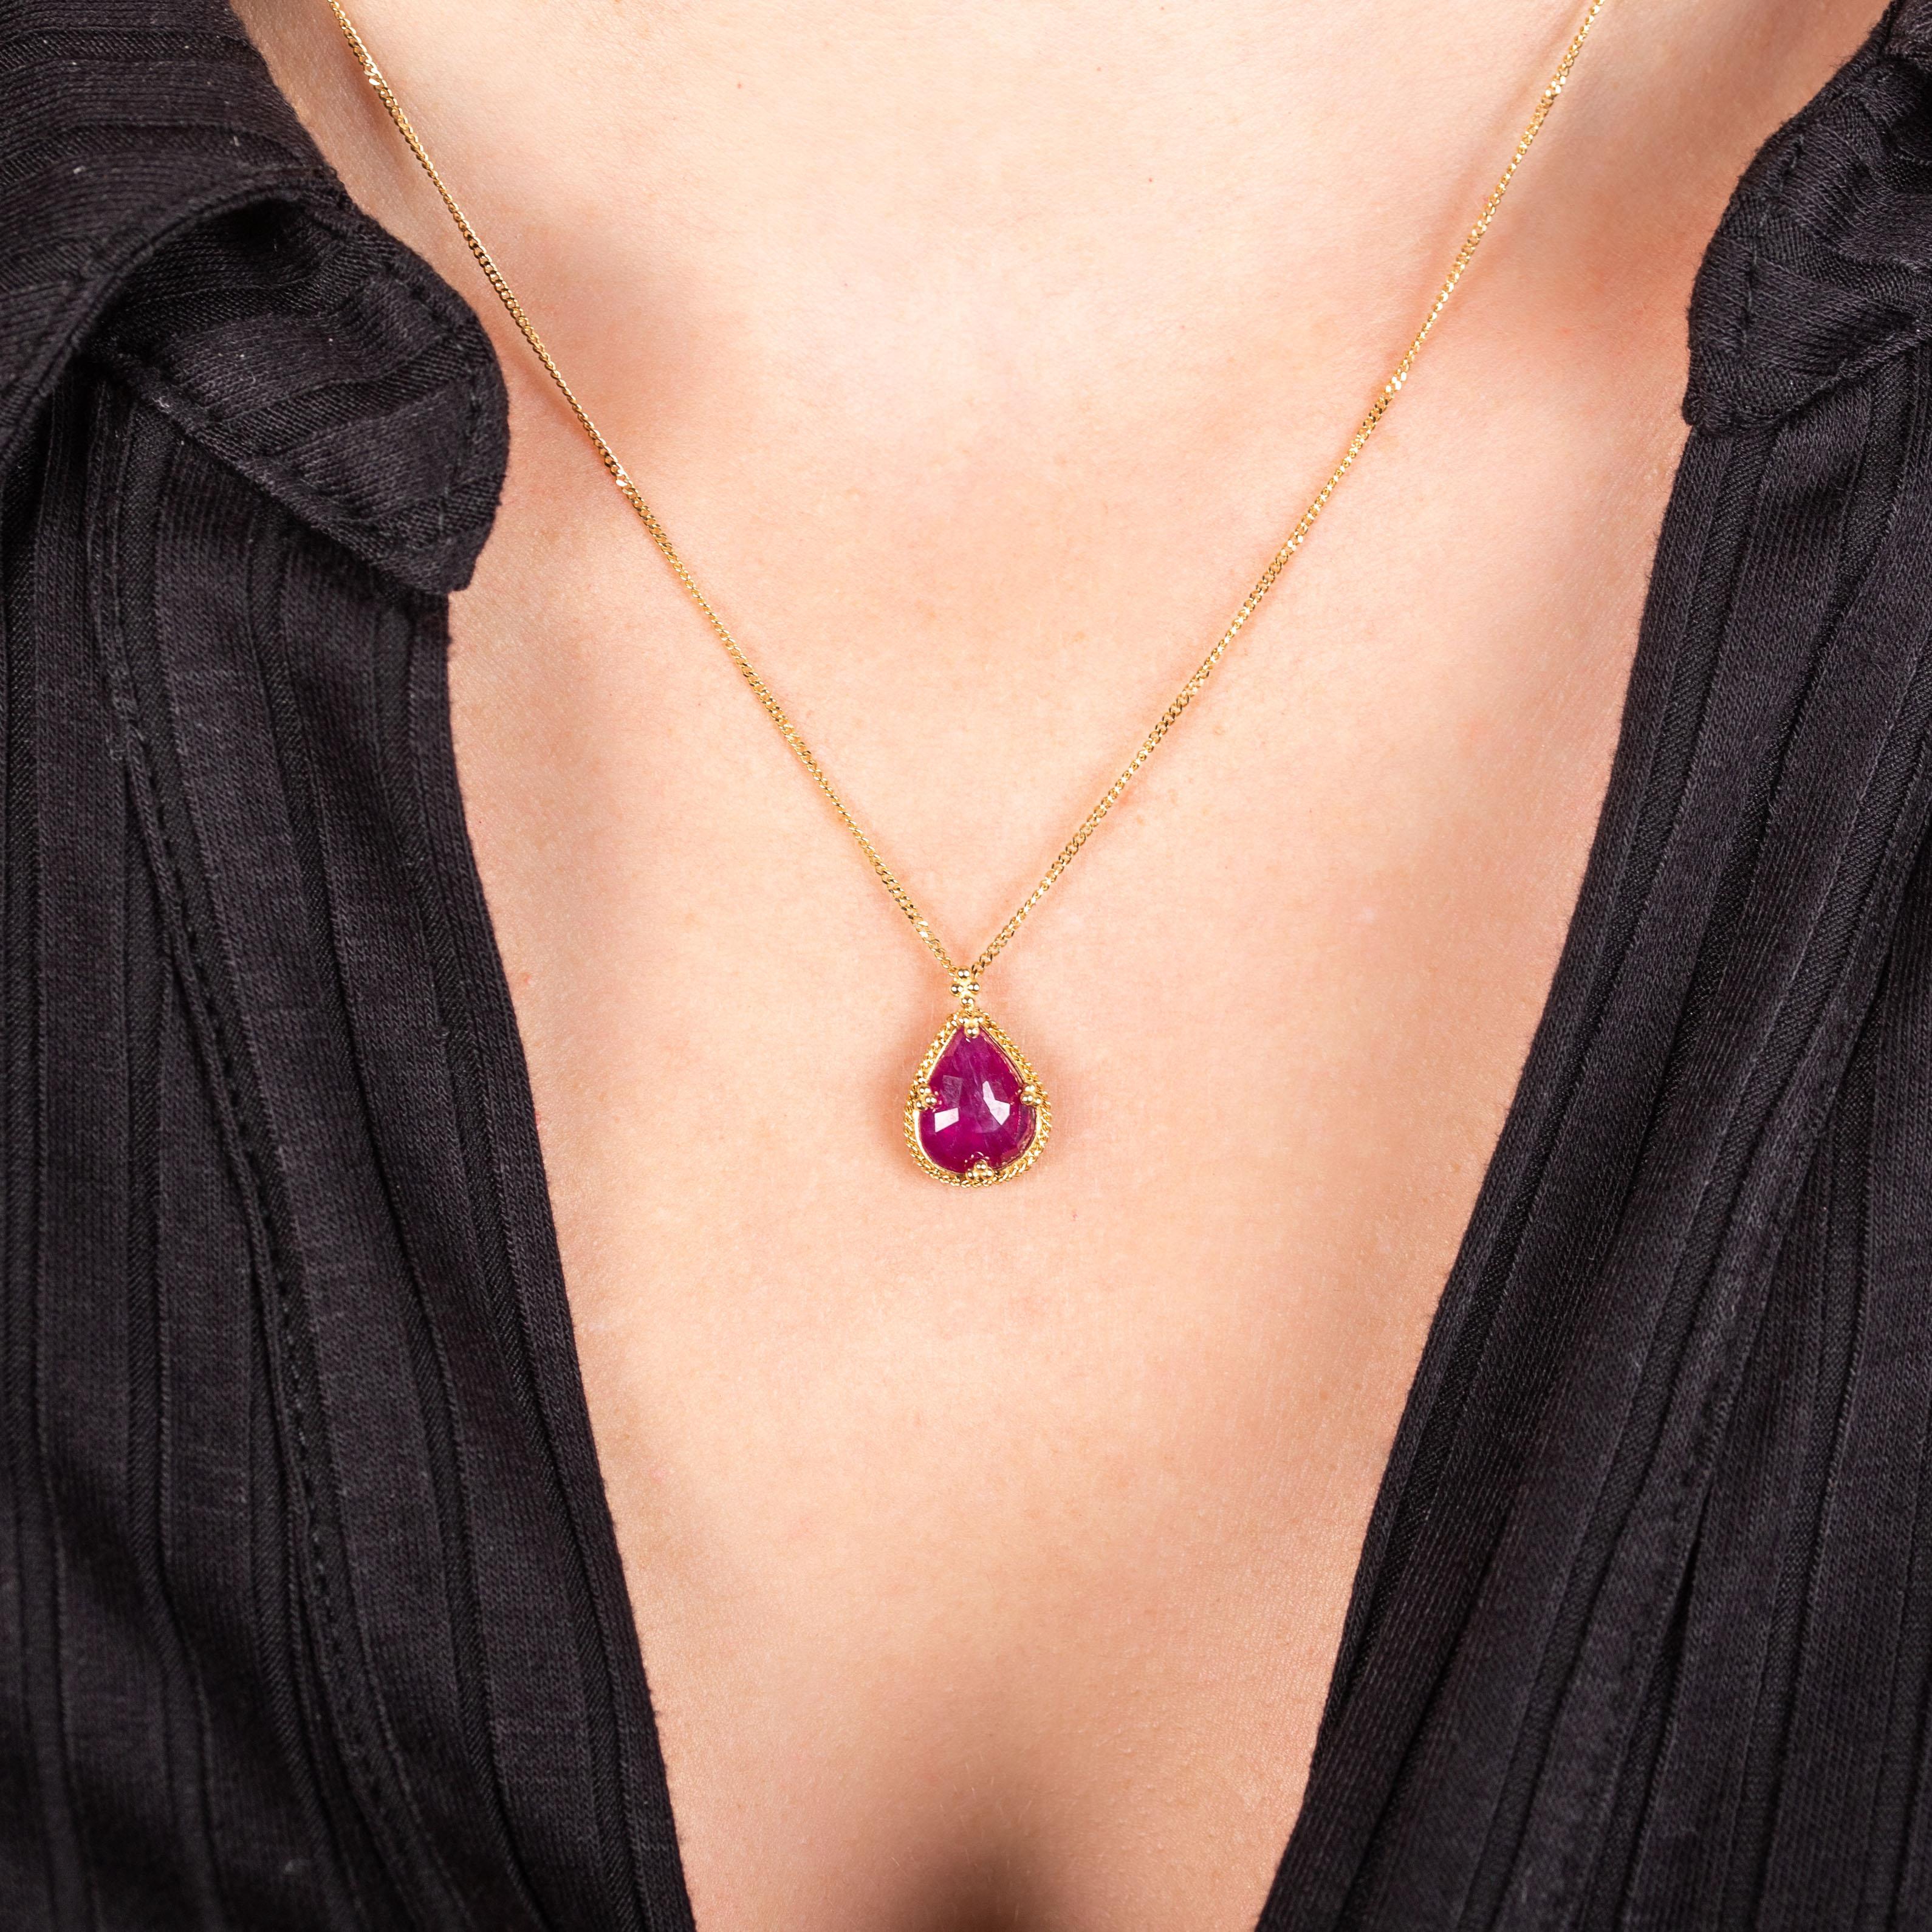 The faceted surface of this stunning, teardrop Ruby reflects light like morning dew drops on a crimson rose petal. This charming gemstone is set in a handmade gold bezel with braided detail and suspended from a gold chain. One of a kind.

Technical